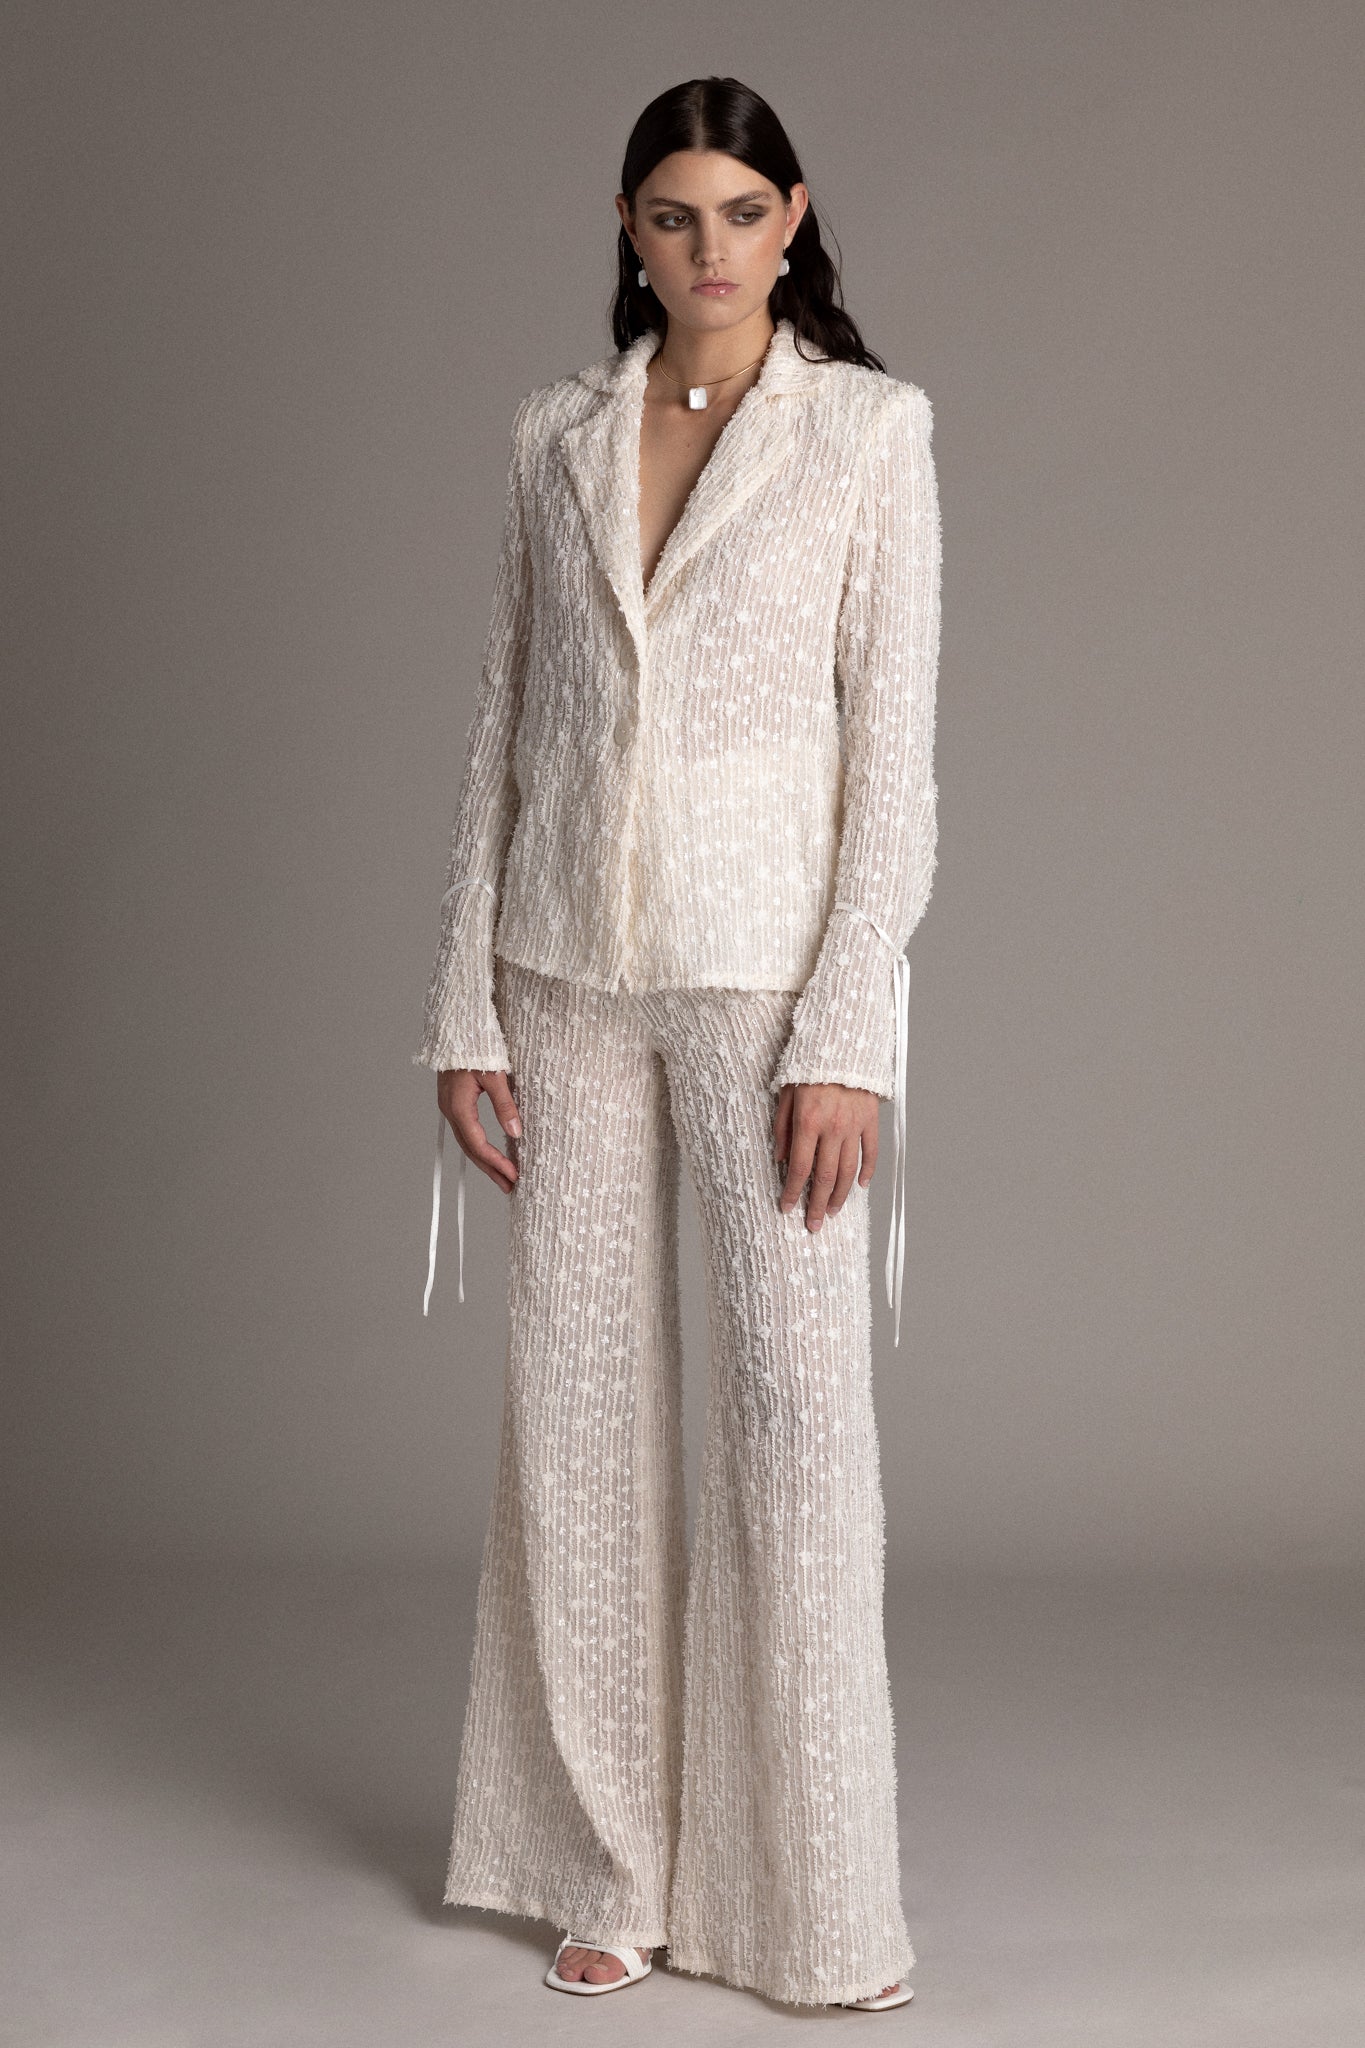 These pants showcase a timeless palazzo silhouette enhanced by a one-of-a-kind textile.